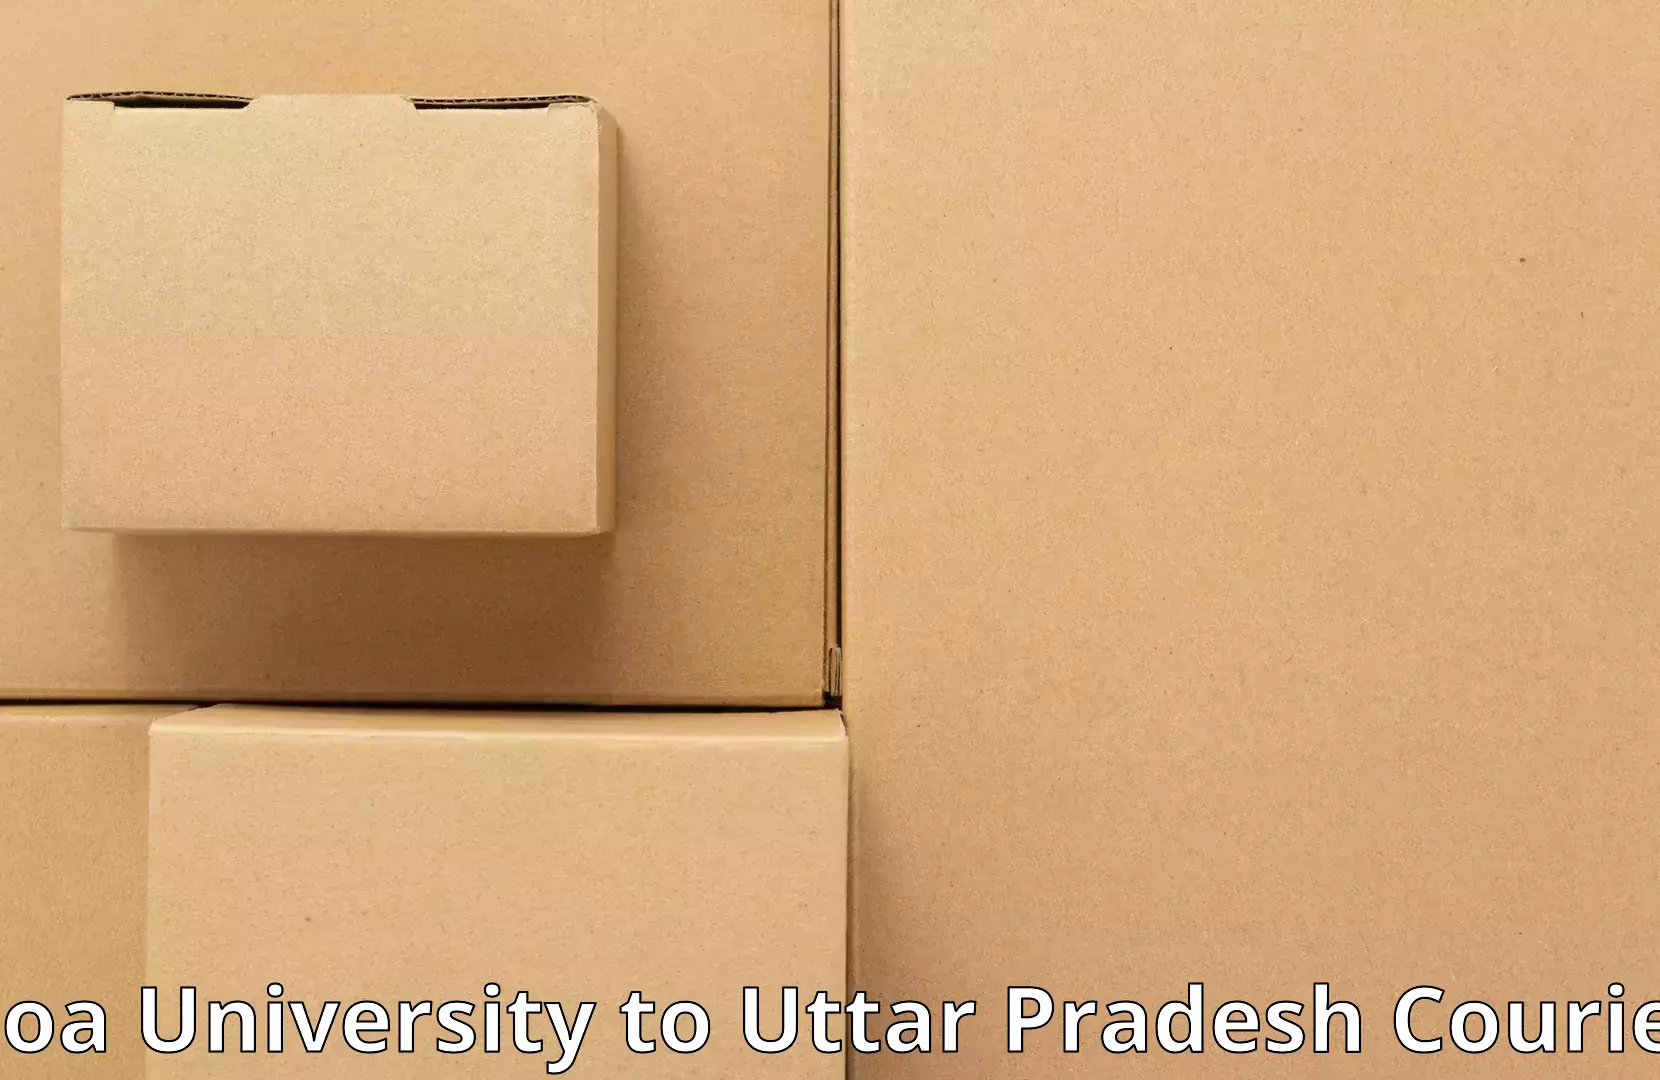 Full-service relocation in Goa University to Kanpur